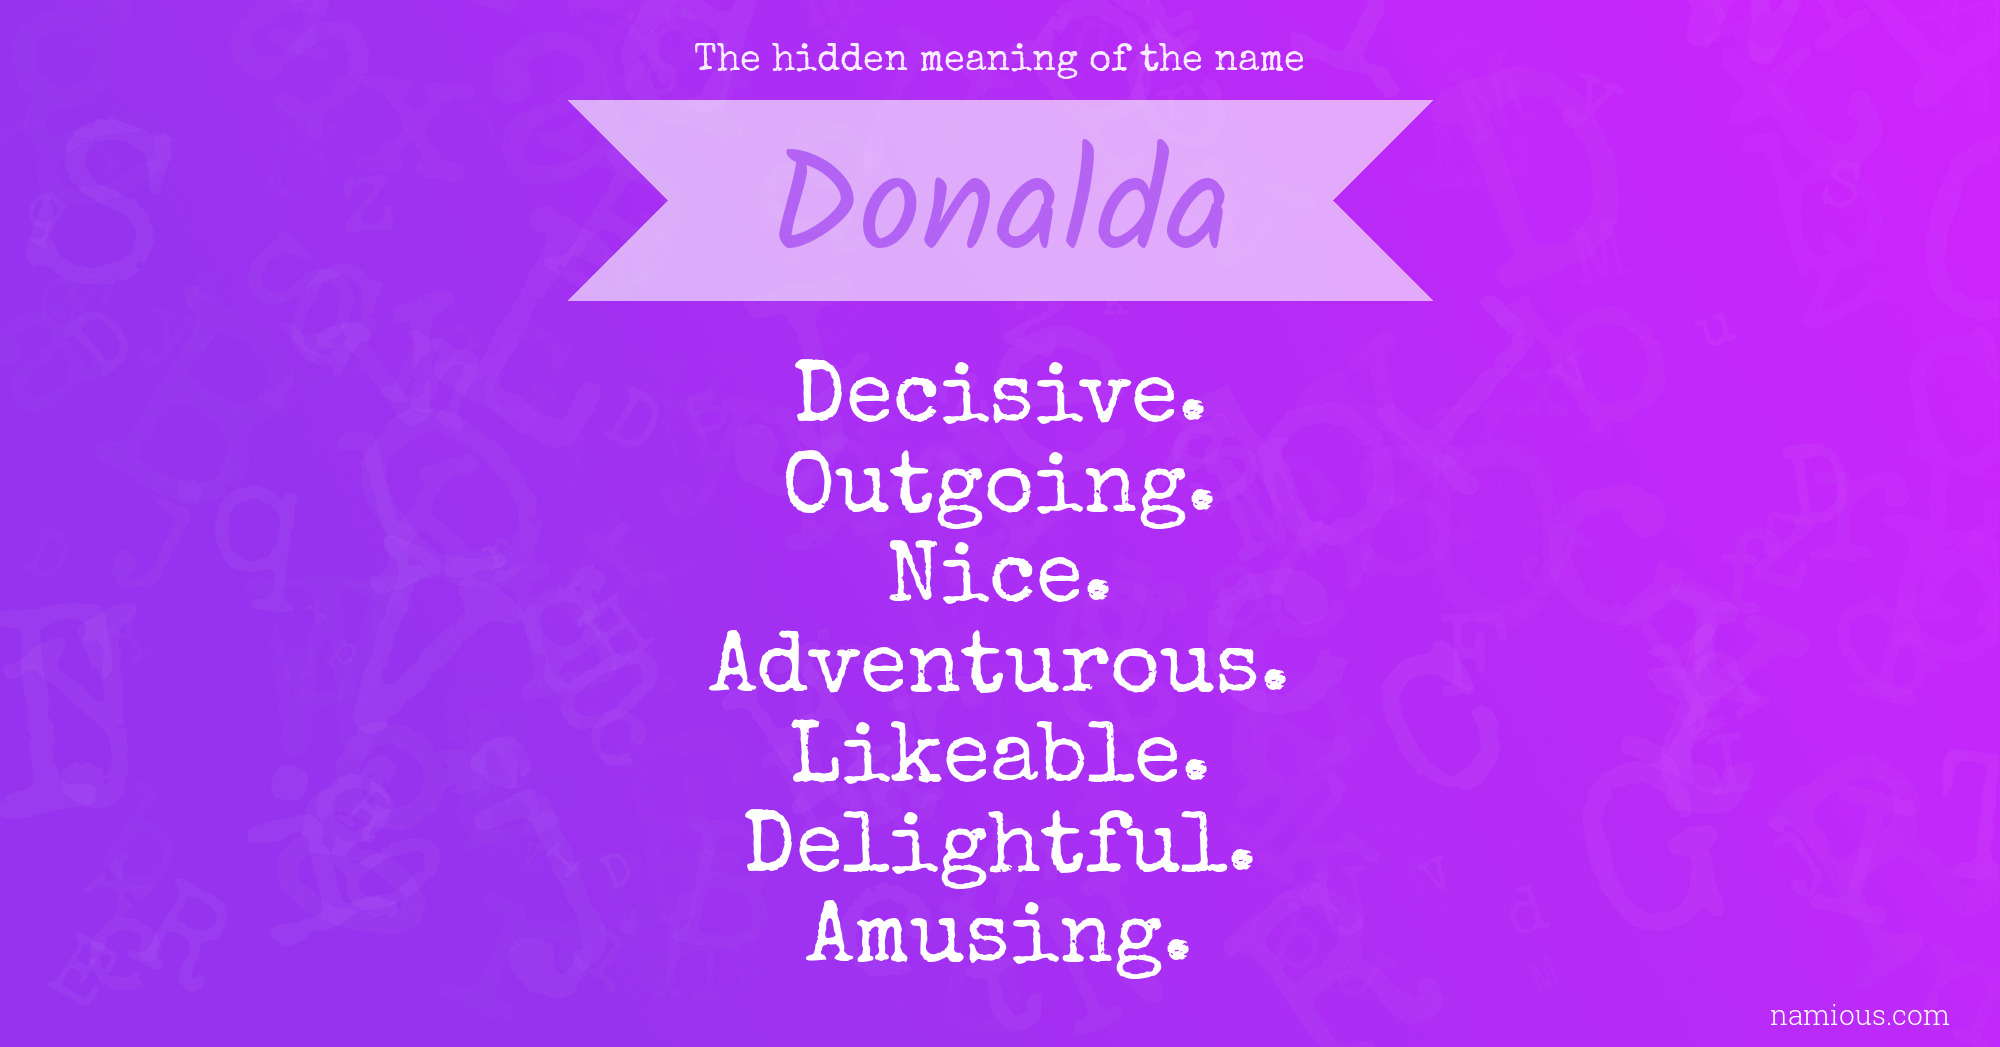 The hidden meaning of the name Donalda